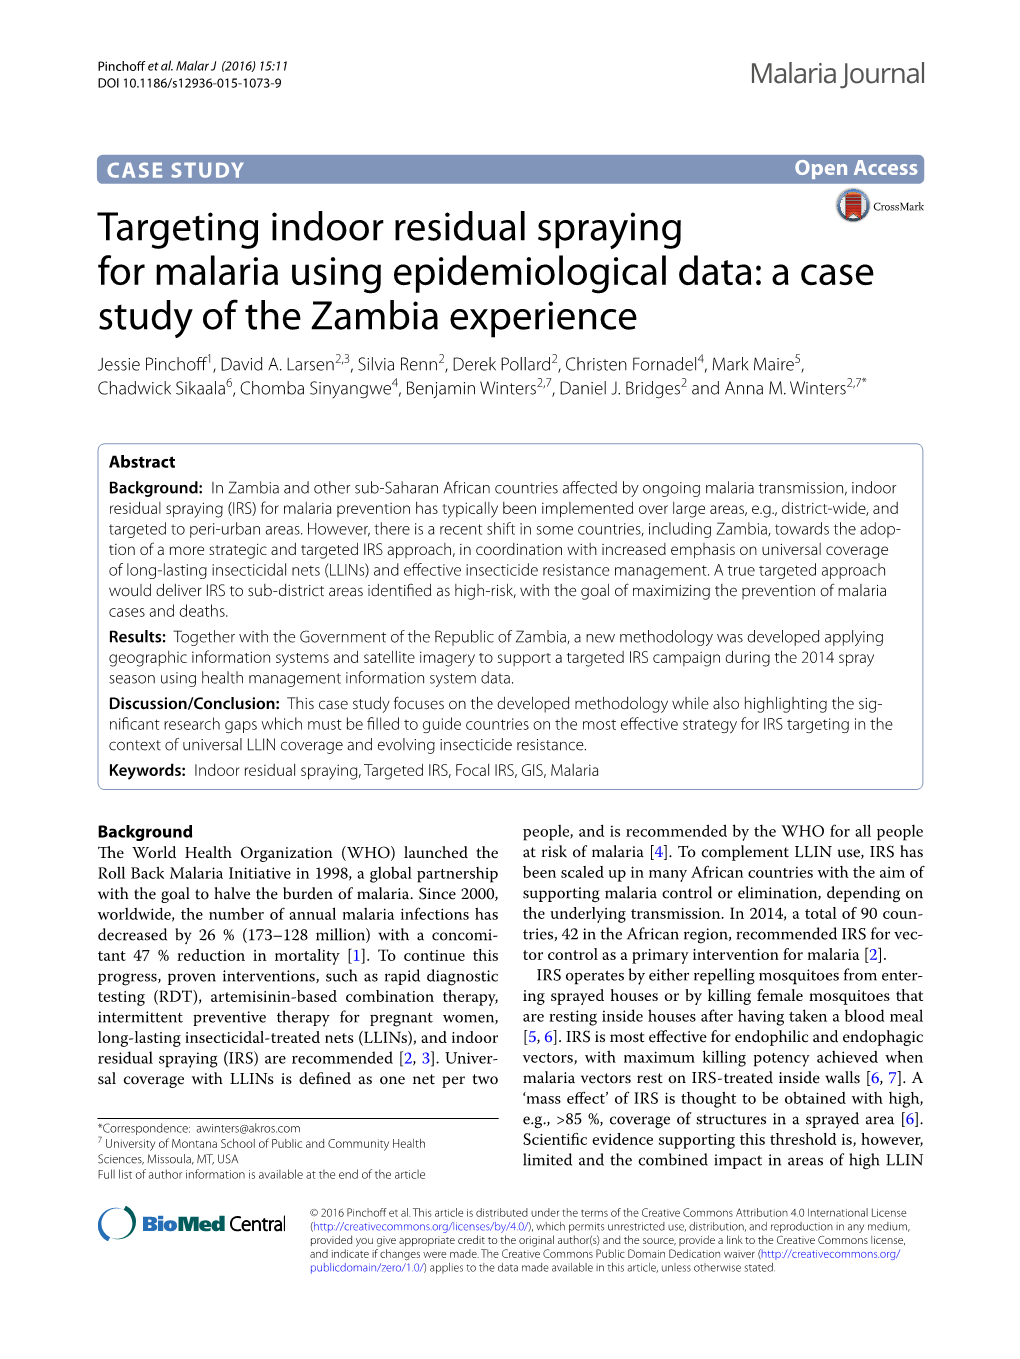 Targeting Indoor Residual Spraying for Malaria Using Epidemiological Data: a Case Study of the Zambia Experience Jessie Pinchoff1, David A